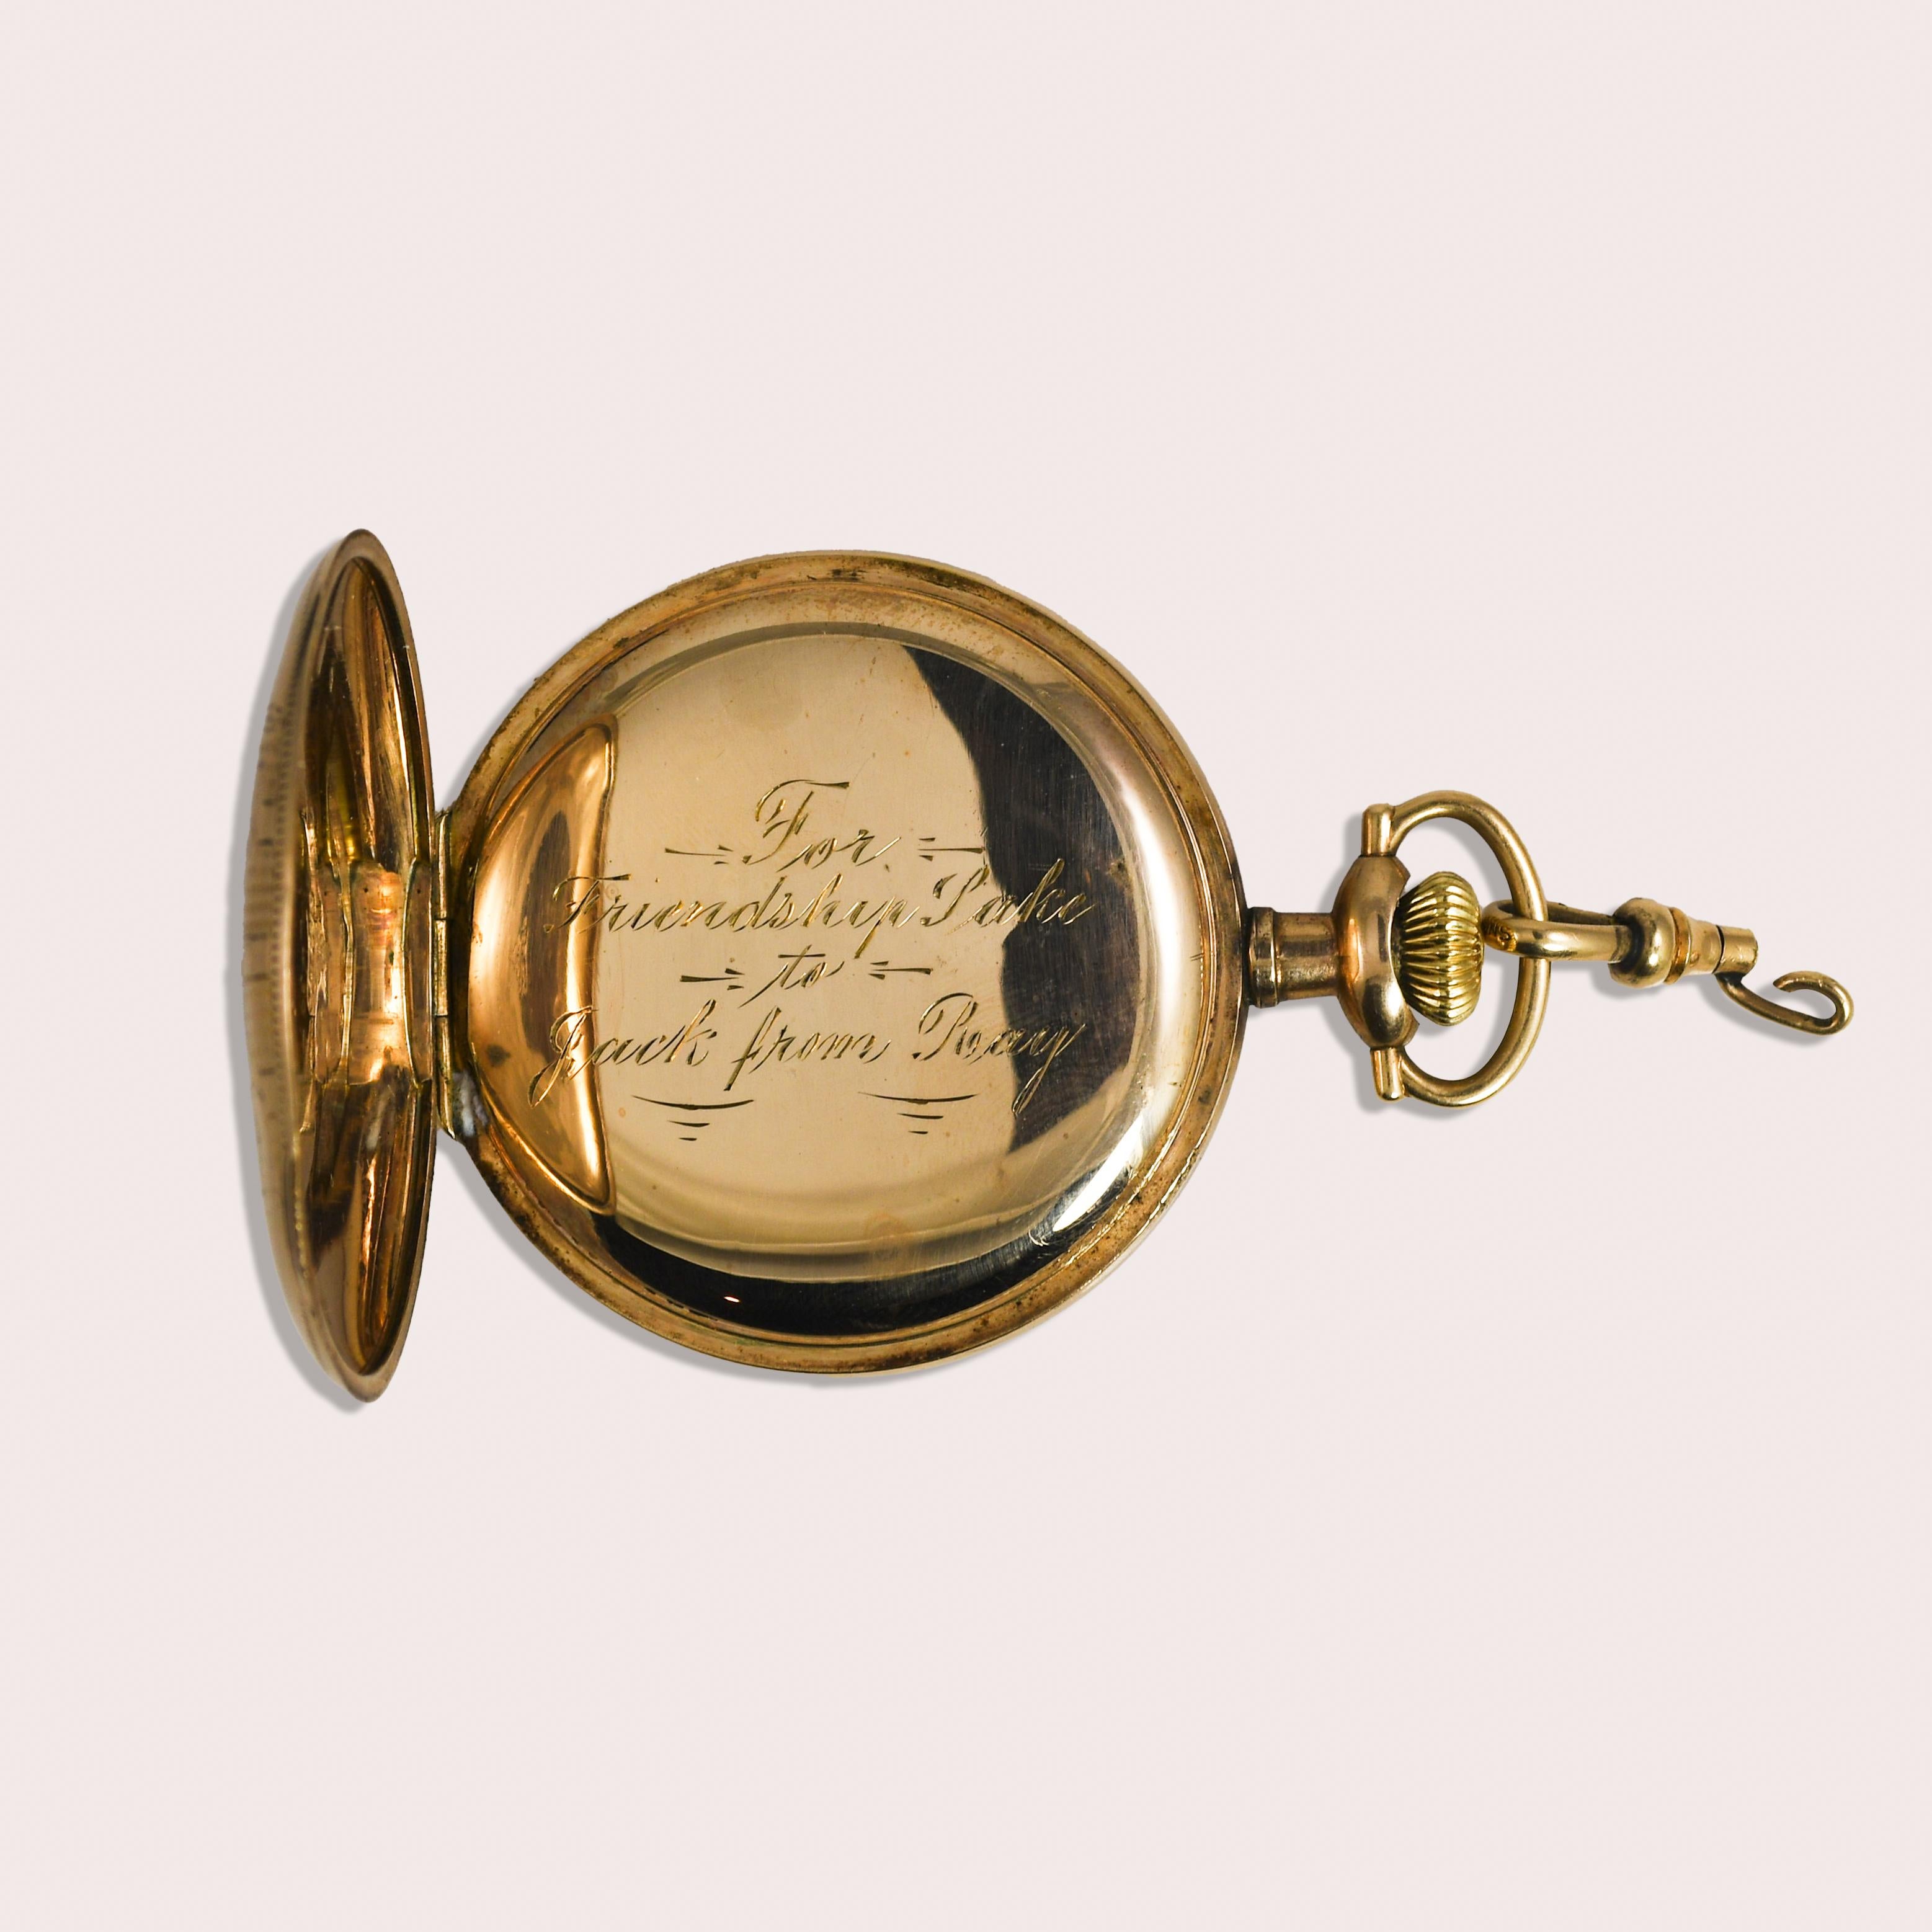 Hamilton pocket watch, gold-filled hunting case.
25 year guaranteed stamped inside case. Size 16, 17 jewels, 3/4 plate.
The time is lever set. Very clean movement.
The serial number is 872656, made in 1911.
The inside of the case has some personal